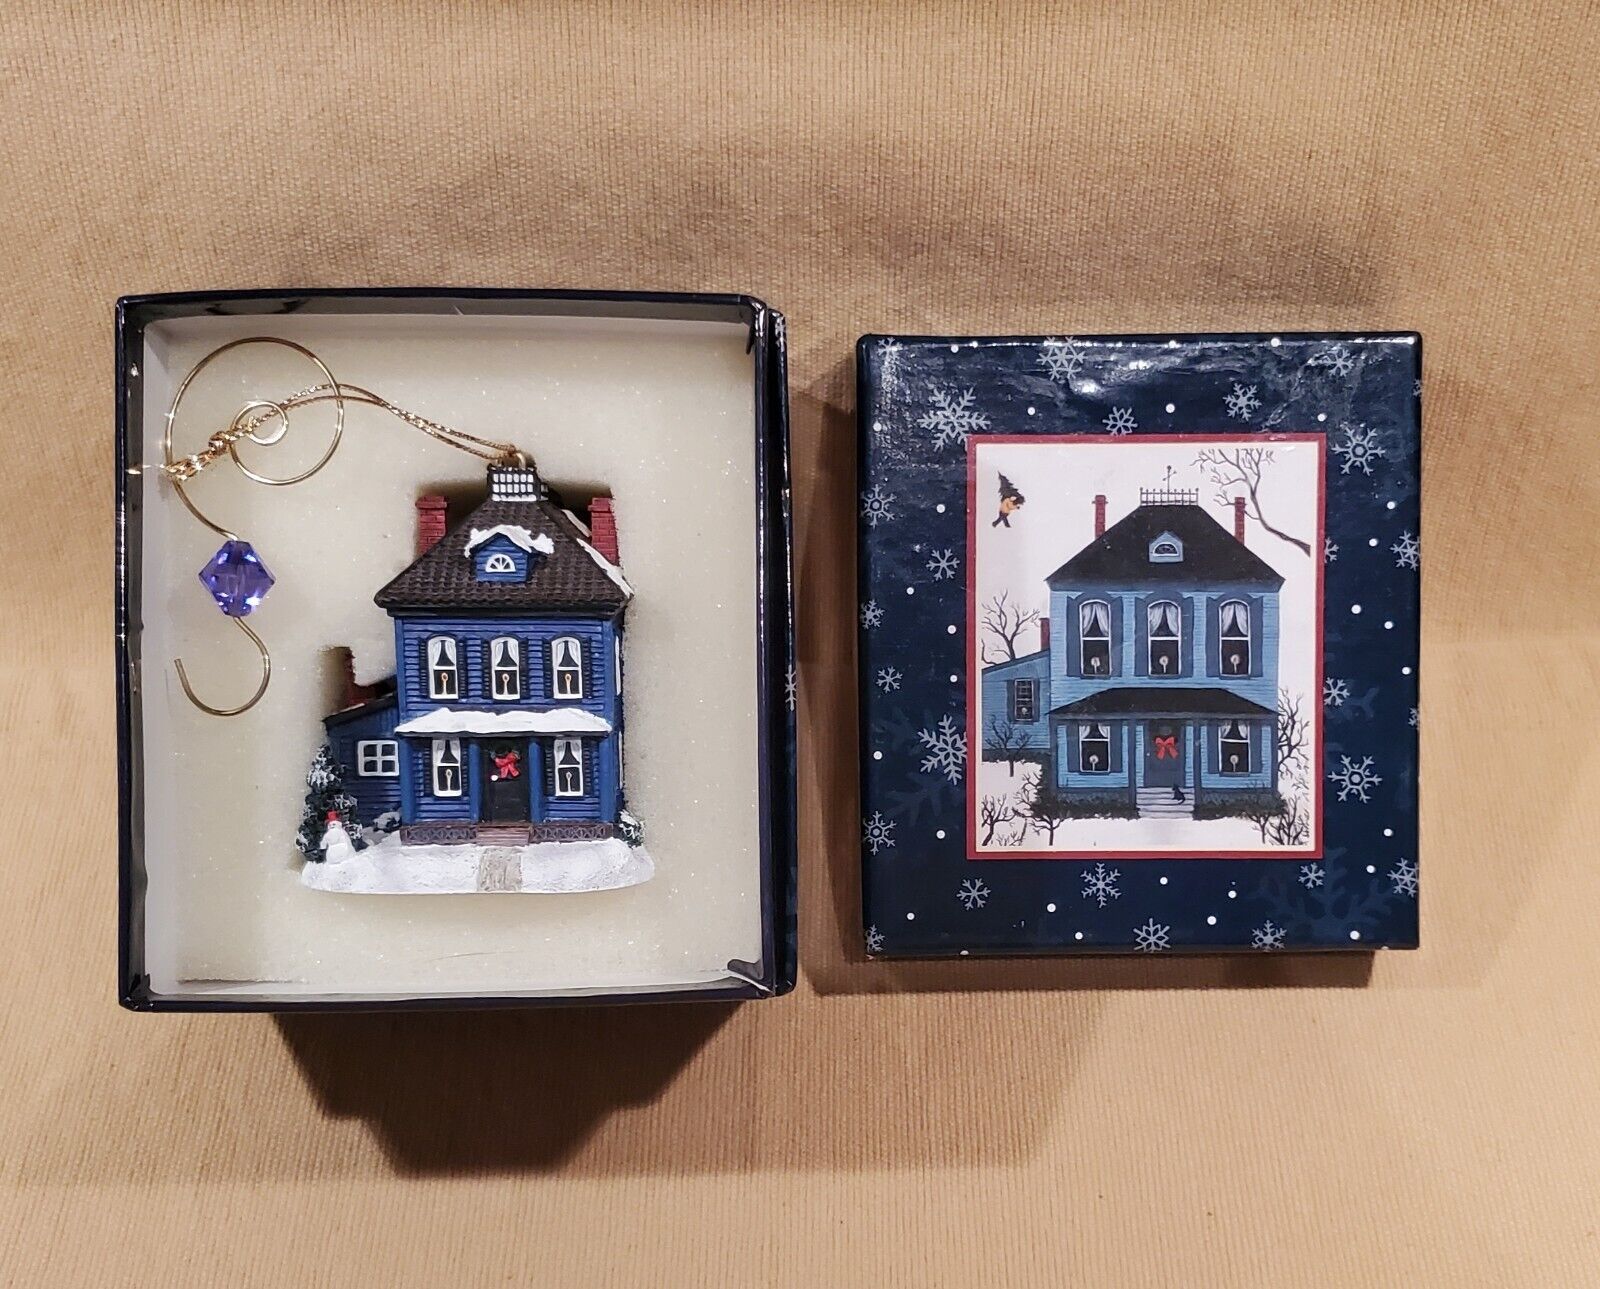 Lang & Wise 'Mitchell Homestead' Ornament 1999  Linda Nelson Stocks NEW IN BOX